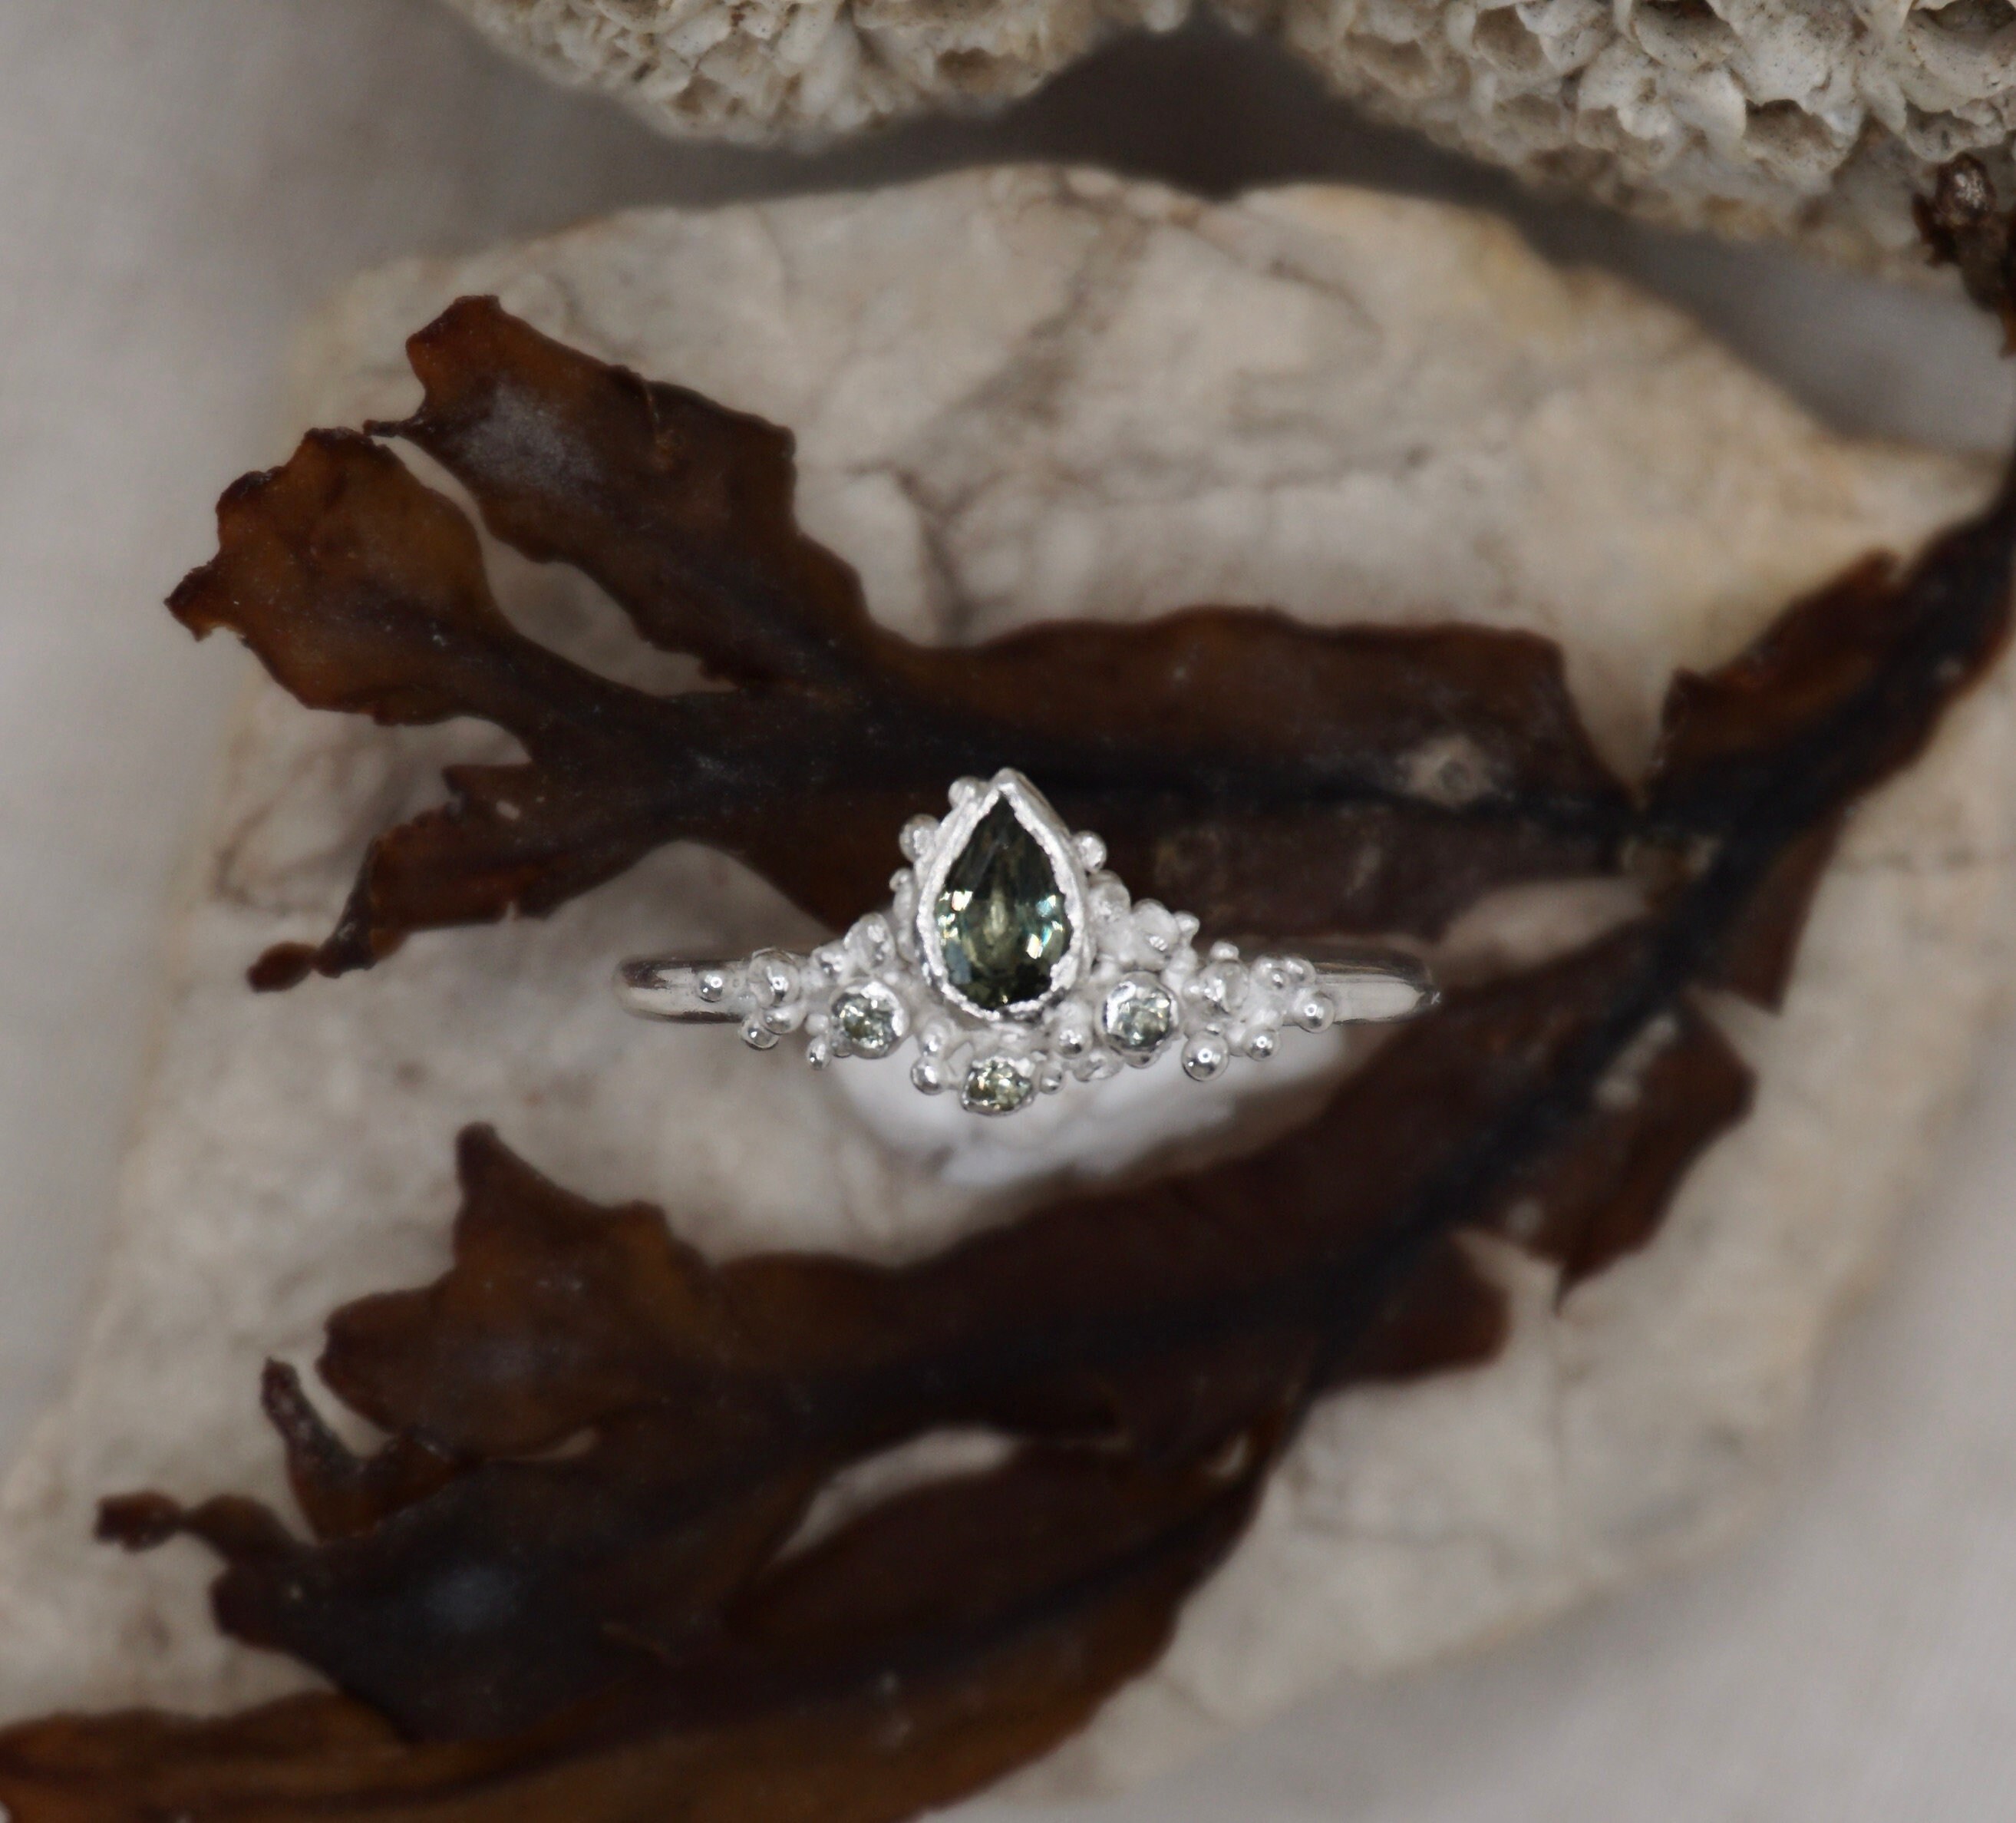 Green Sapphire Ring | Siren Mermaid Engagement Recycled Silver Barnacle